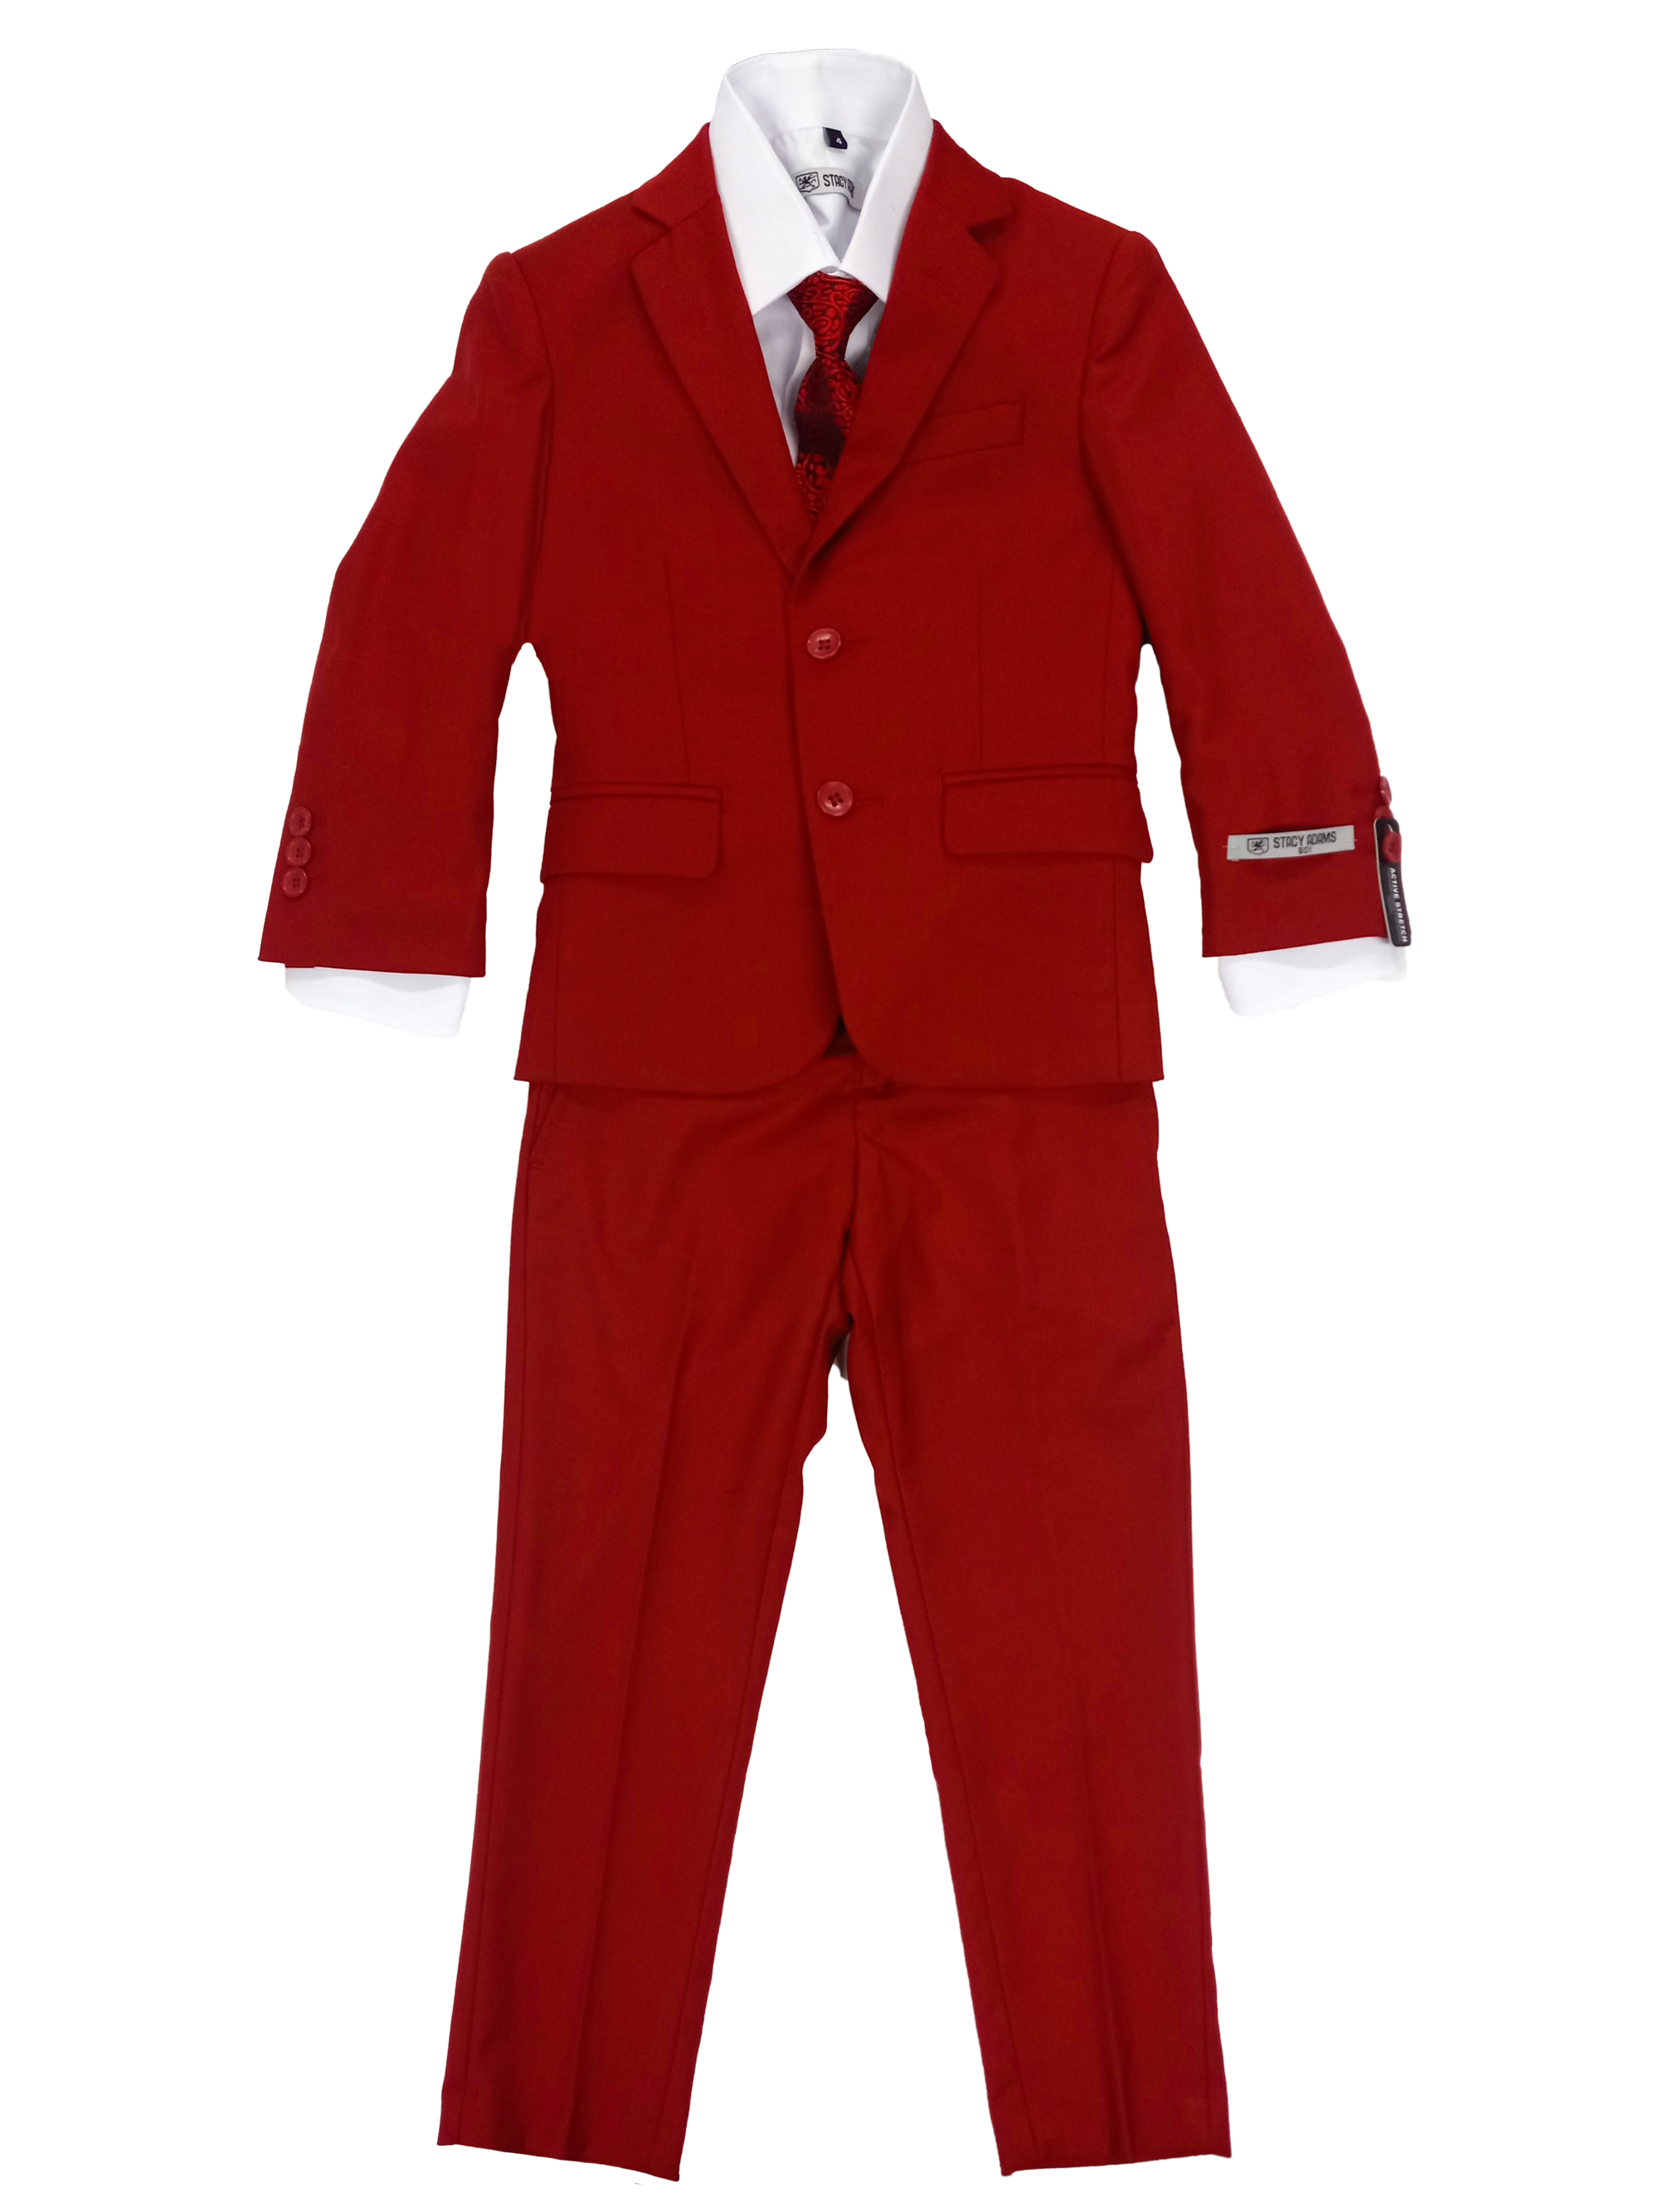 Boys Stacy Adams Red 5 pc Suits